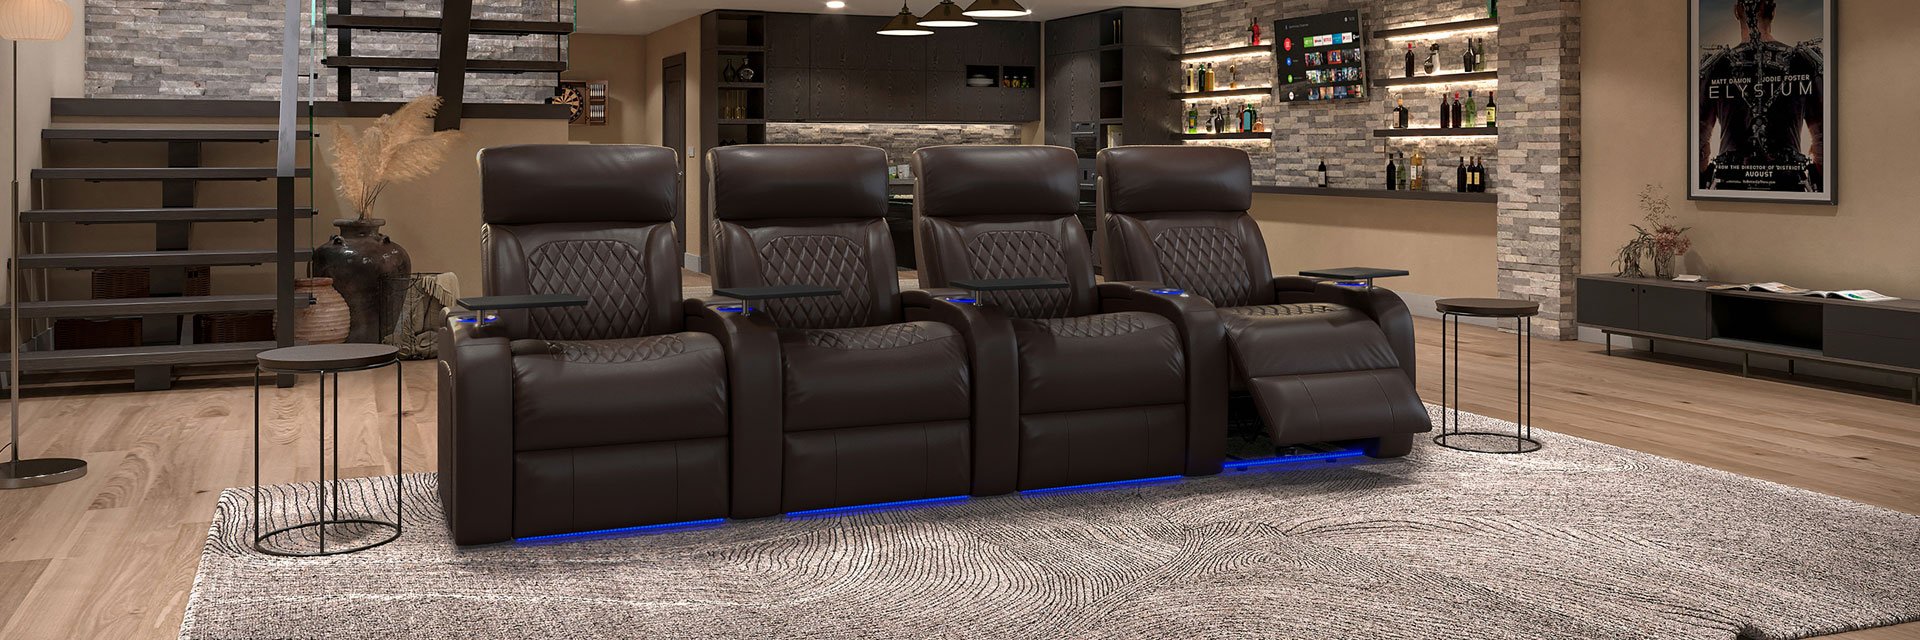 where to buy home theater seats